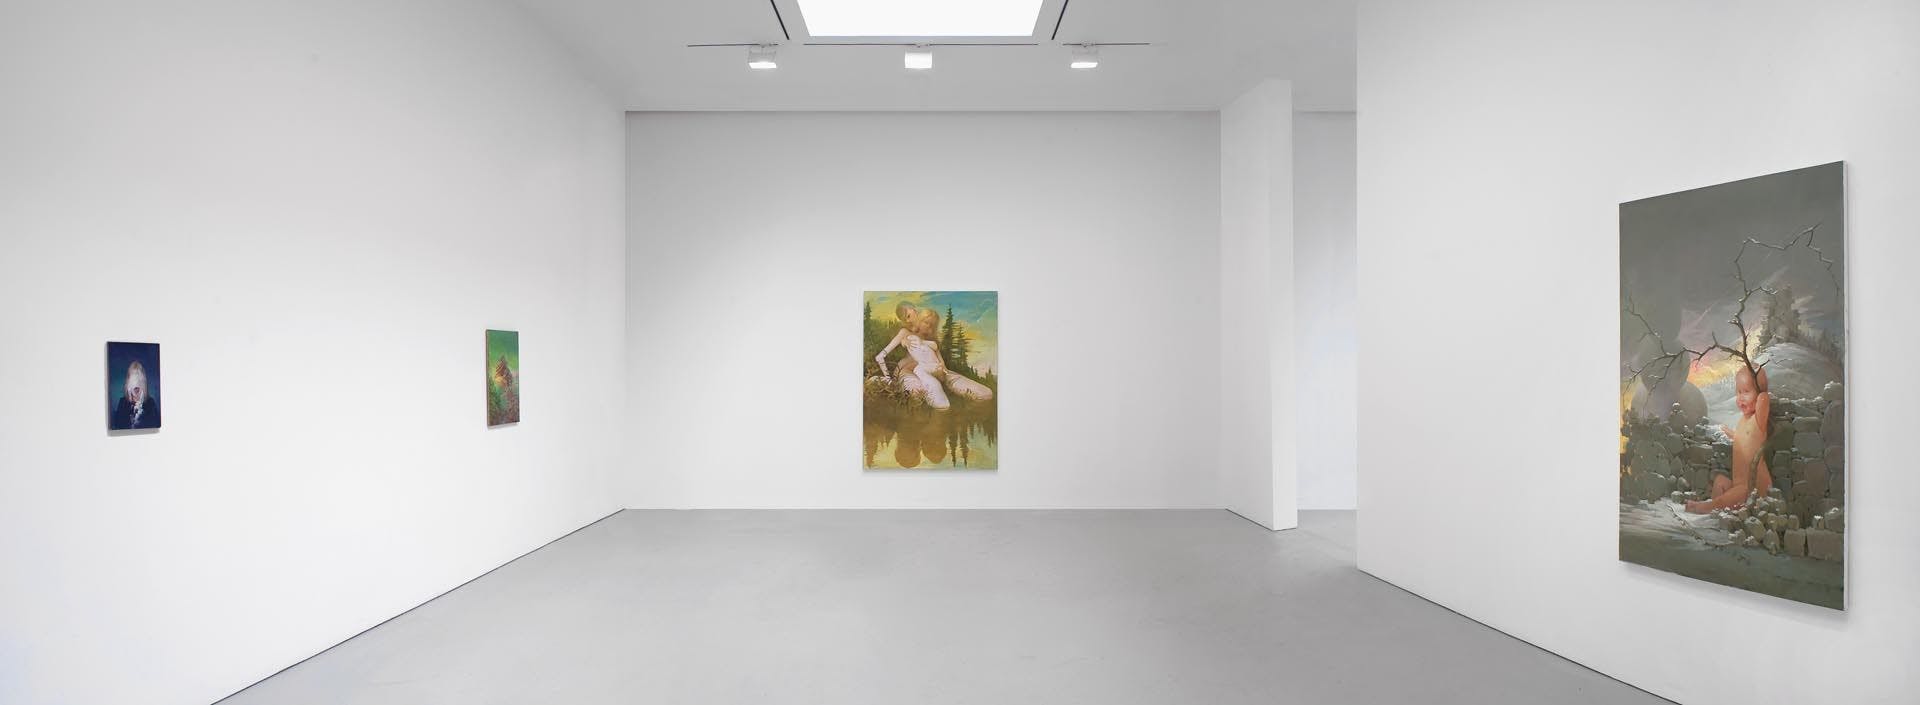 Installation view of the exhibition, Lisa Yuskavage: New Paintings, at David Zwirner in New York, dated 2009.